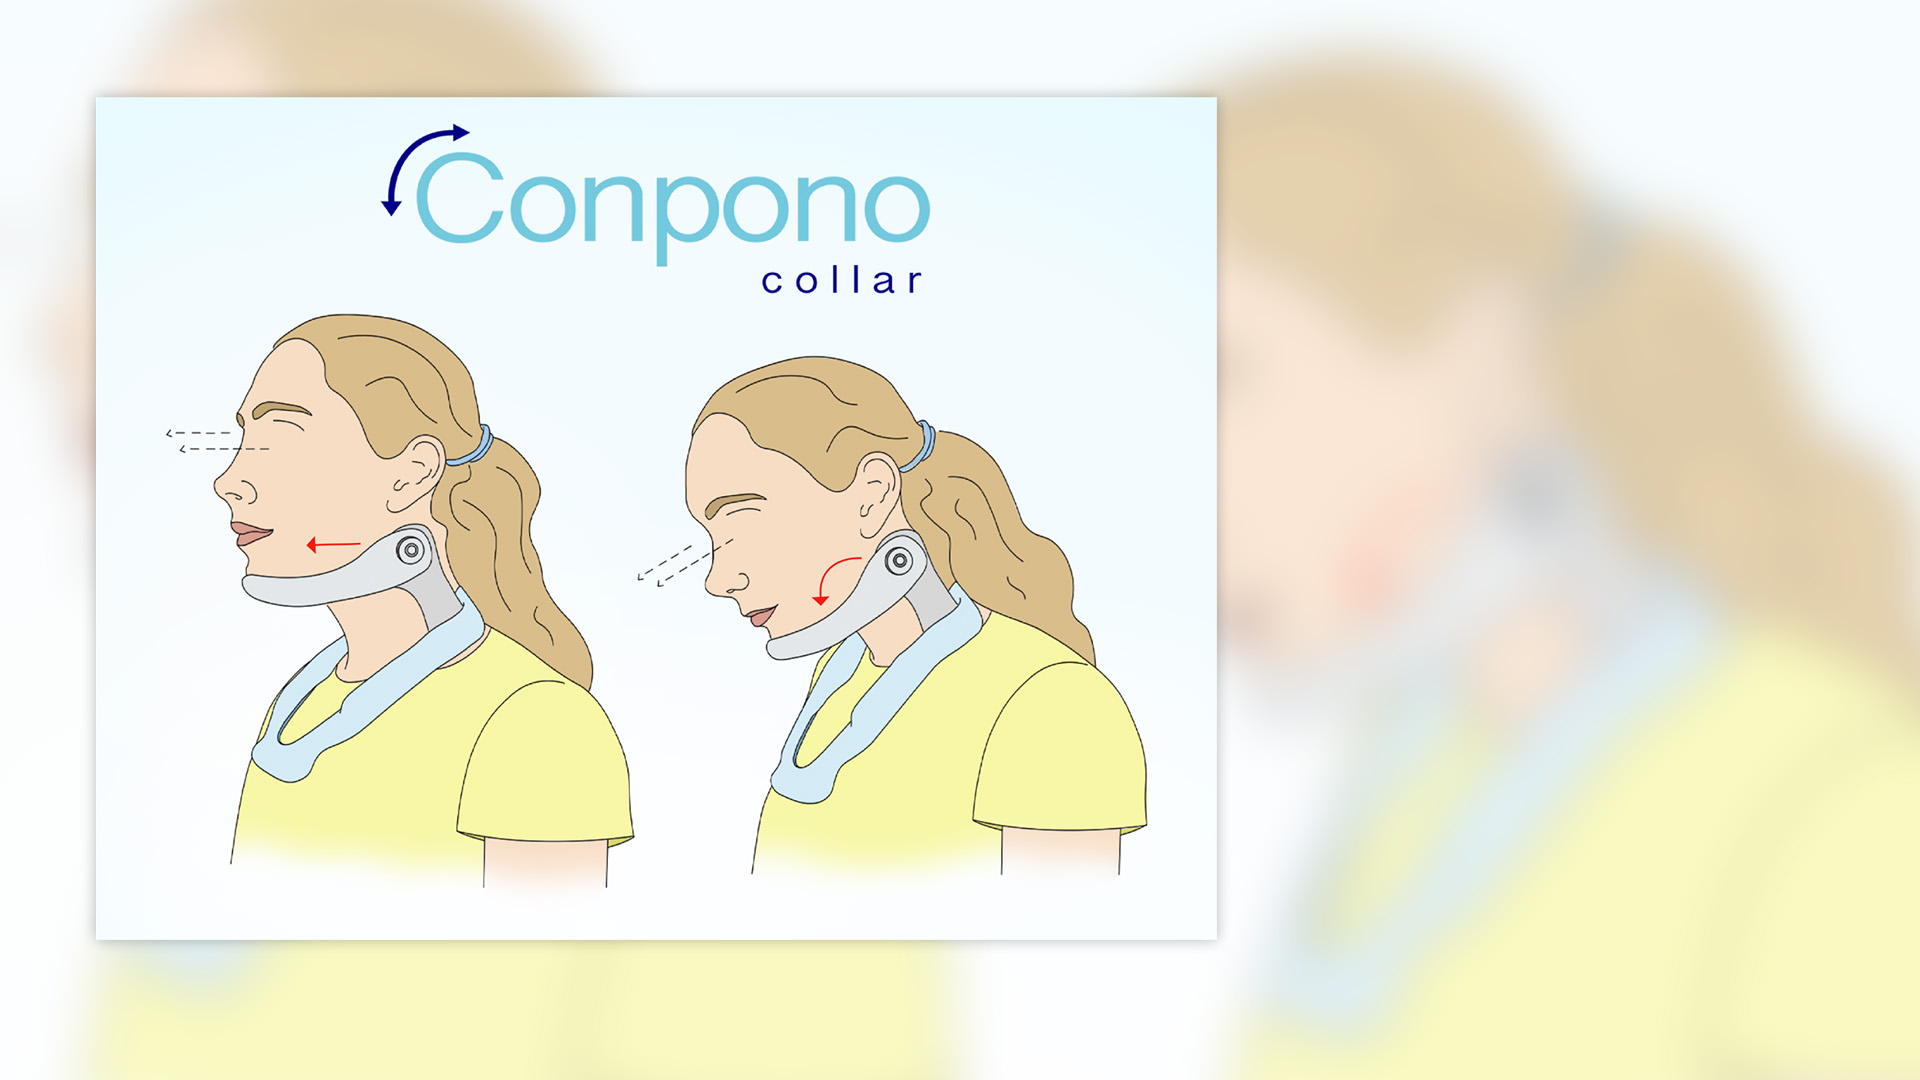 An illustration of the Conpono Collar featuring a depiction of a patient wearing the collar while looking straight ahead on the left and another depiction of the patient looking down on the right, demonstrating the range of motion afforded by wearing it.